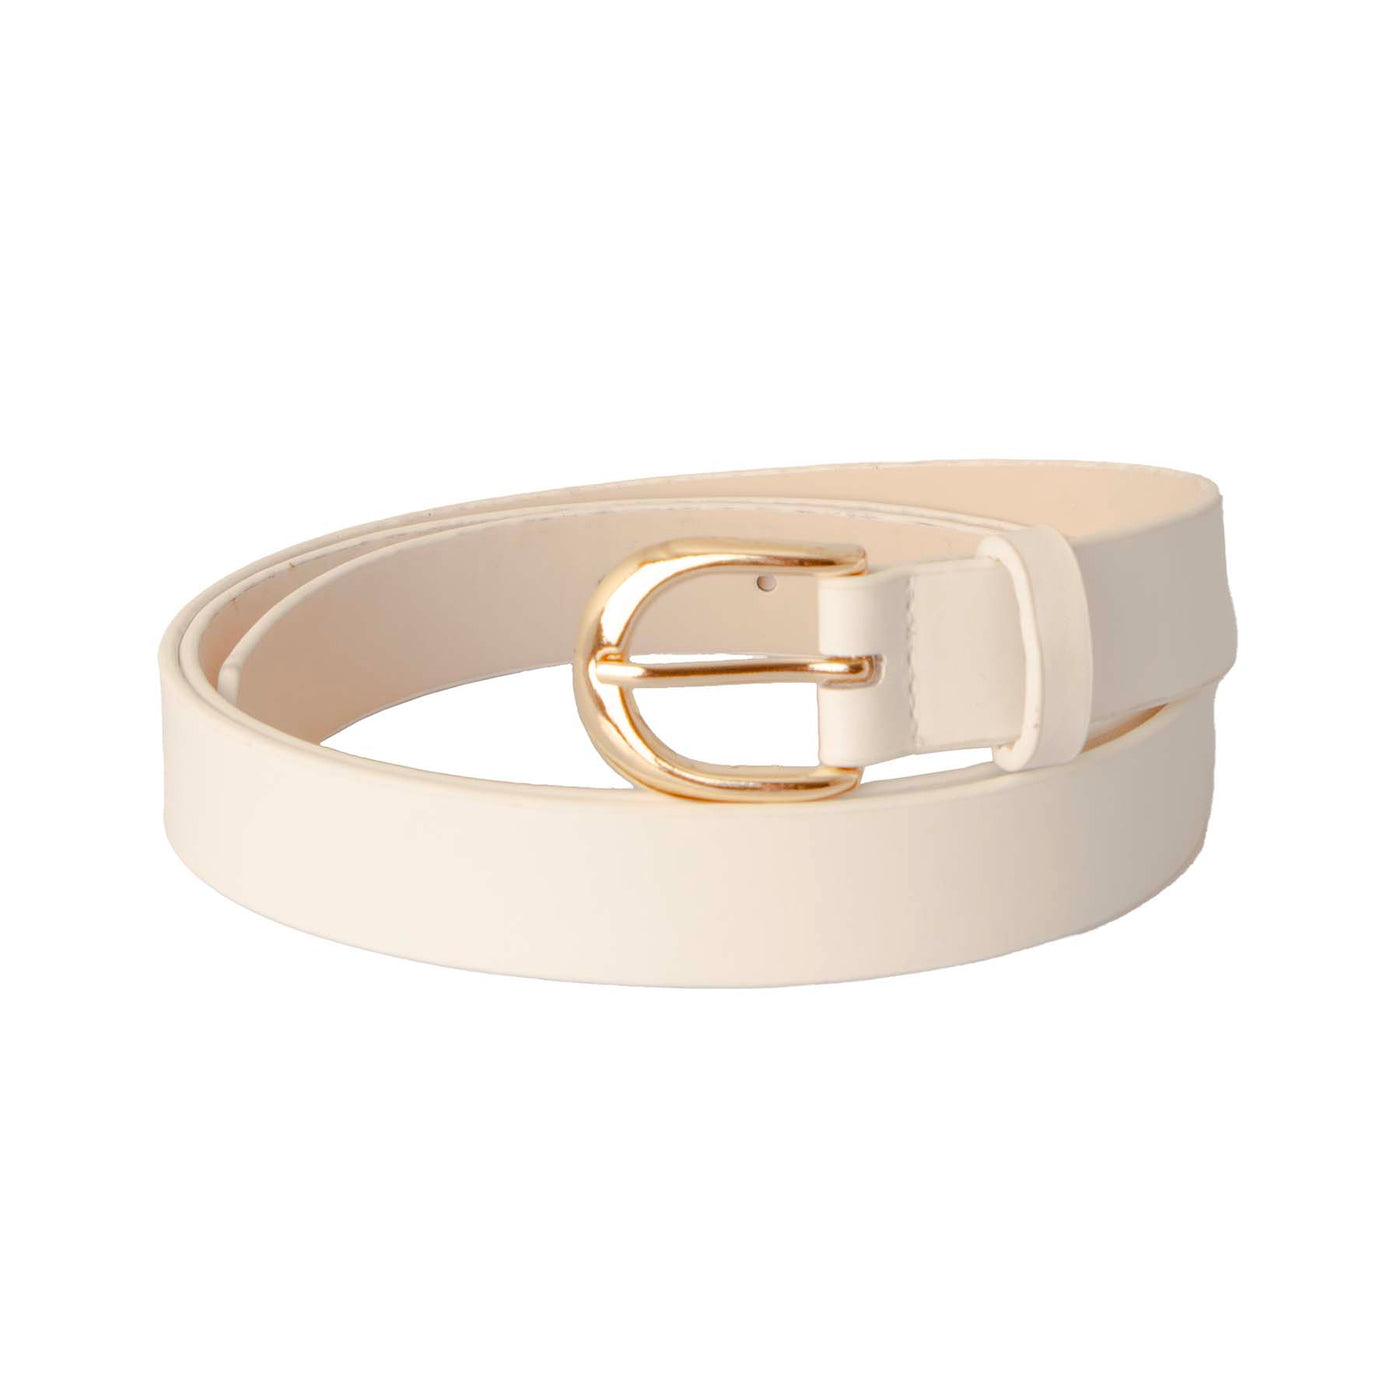 Sass Seema Belt with Gold Buckle in White